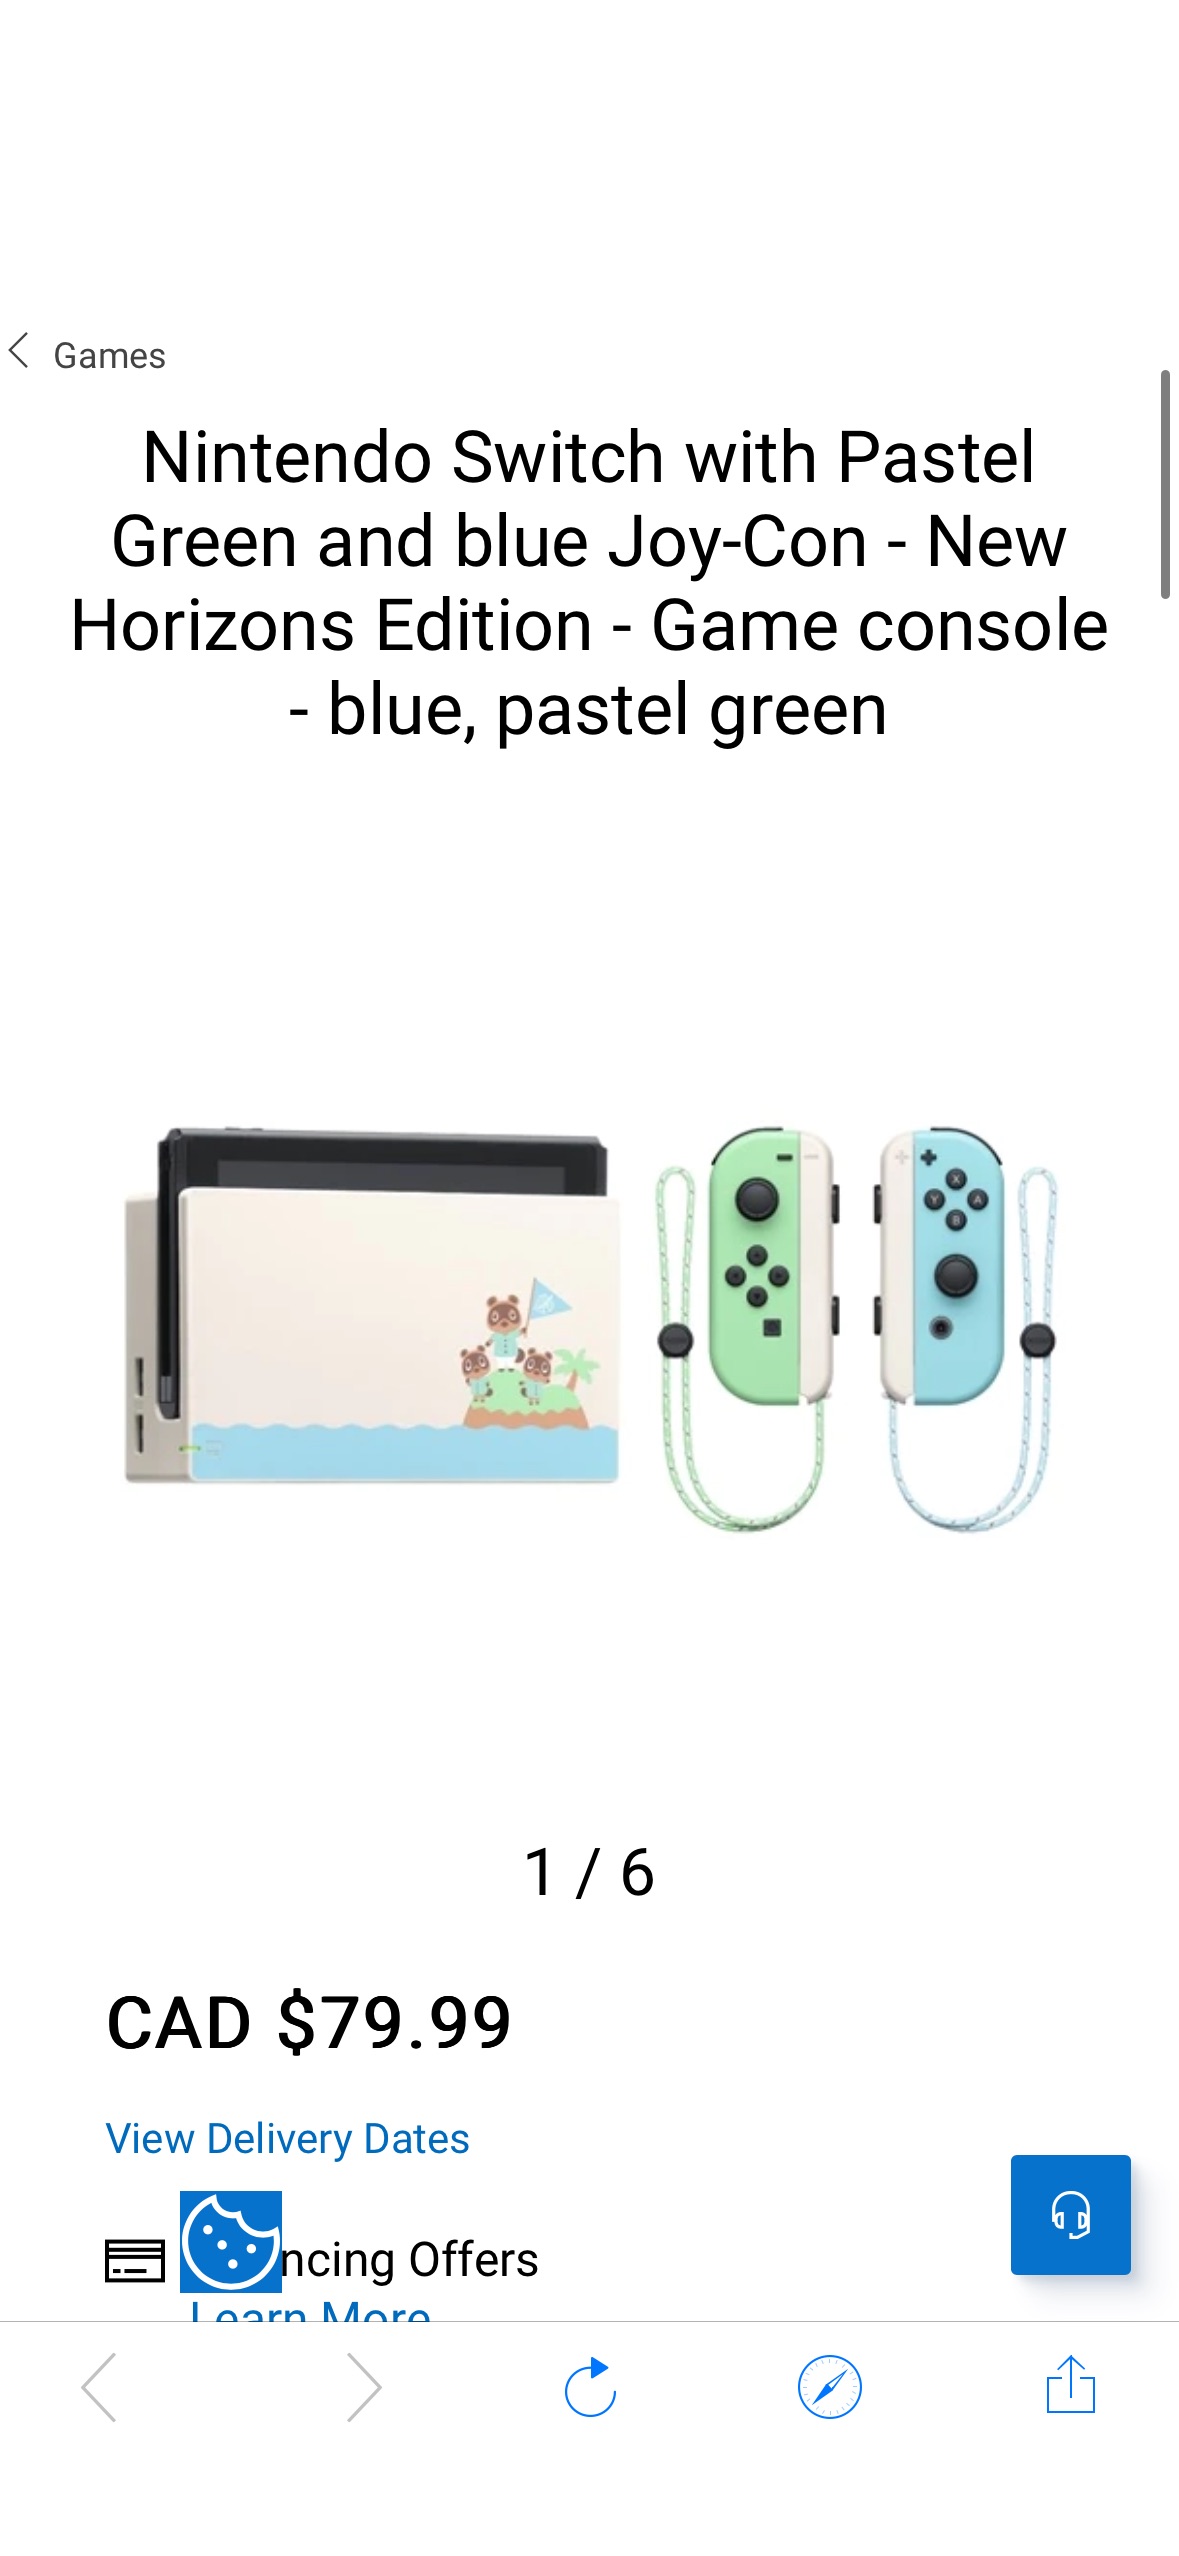 Nintendo Switch with Pastel Green and blue Joy-Con - New Horizons Edition - Game console - blue, pastel green | Dell Canada